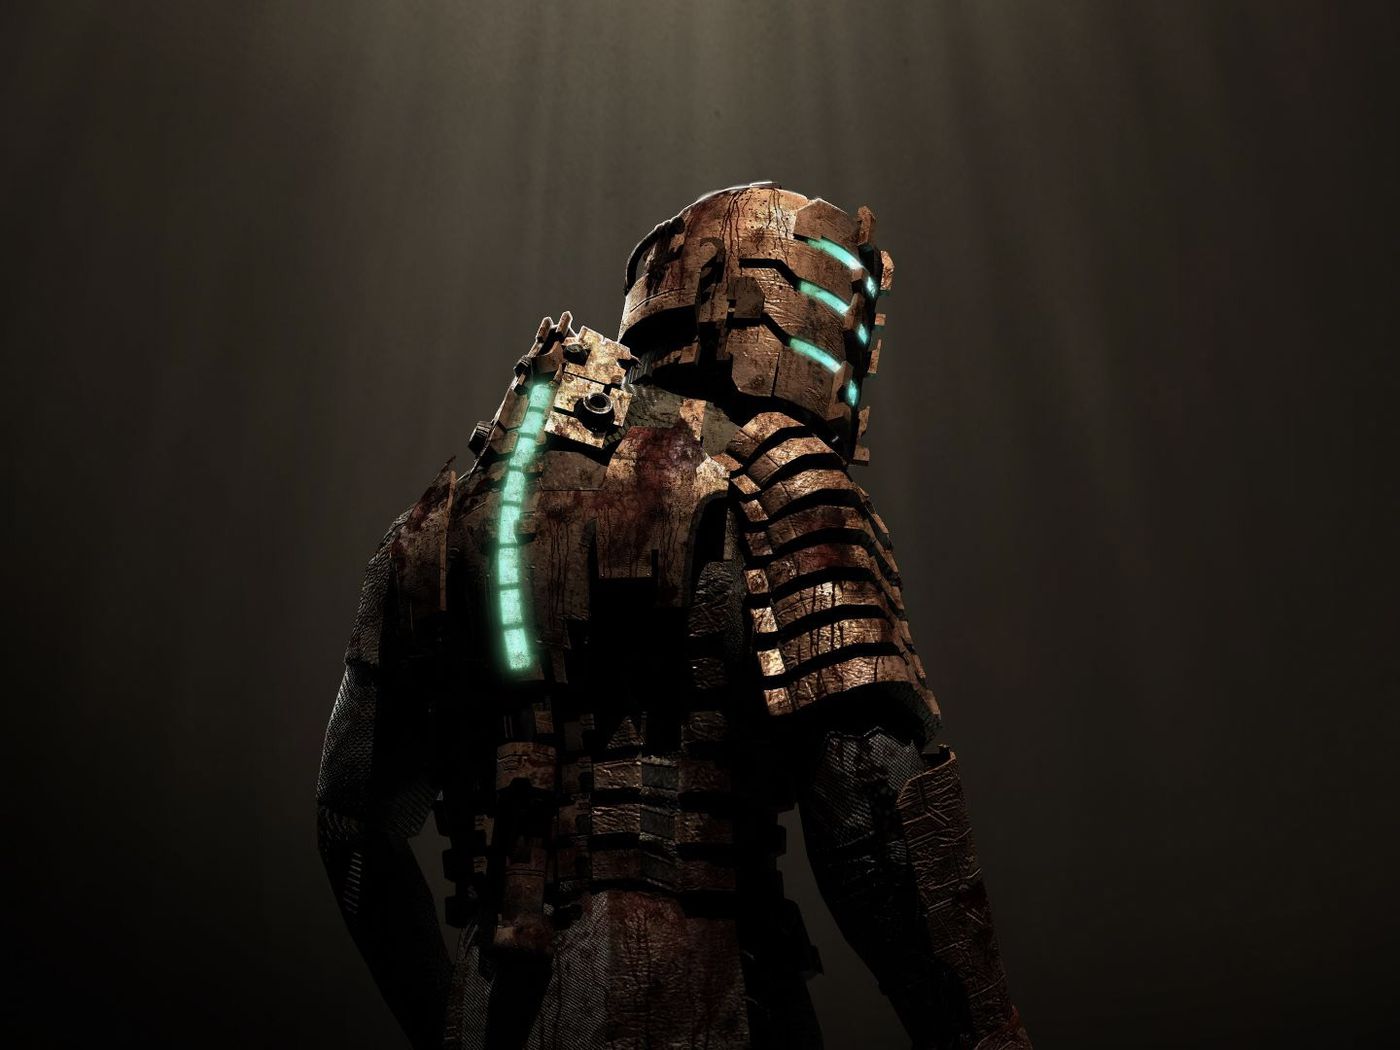 Dead Space remake gets a release date, “full reveal” coming this fall